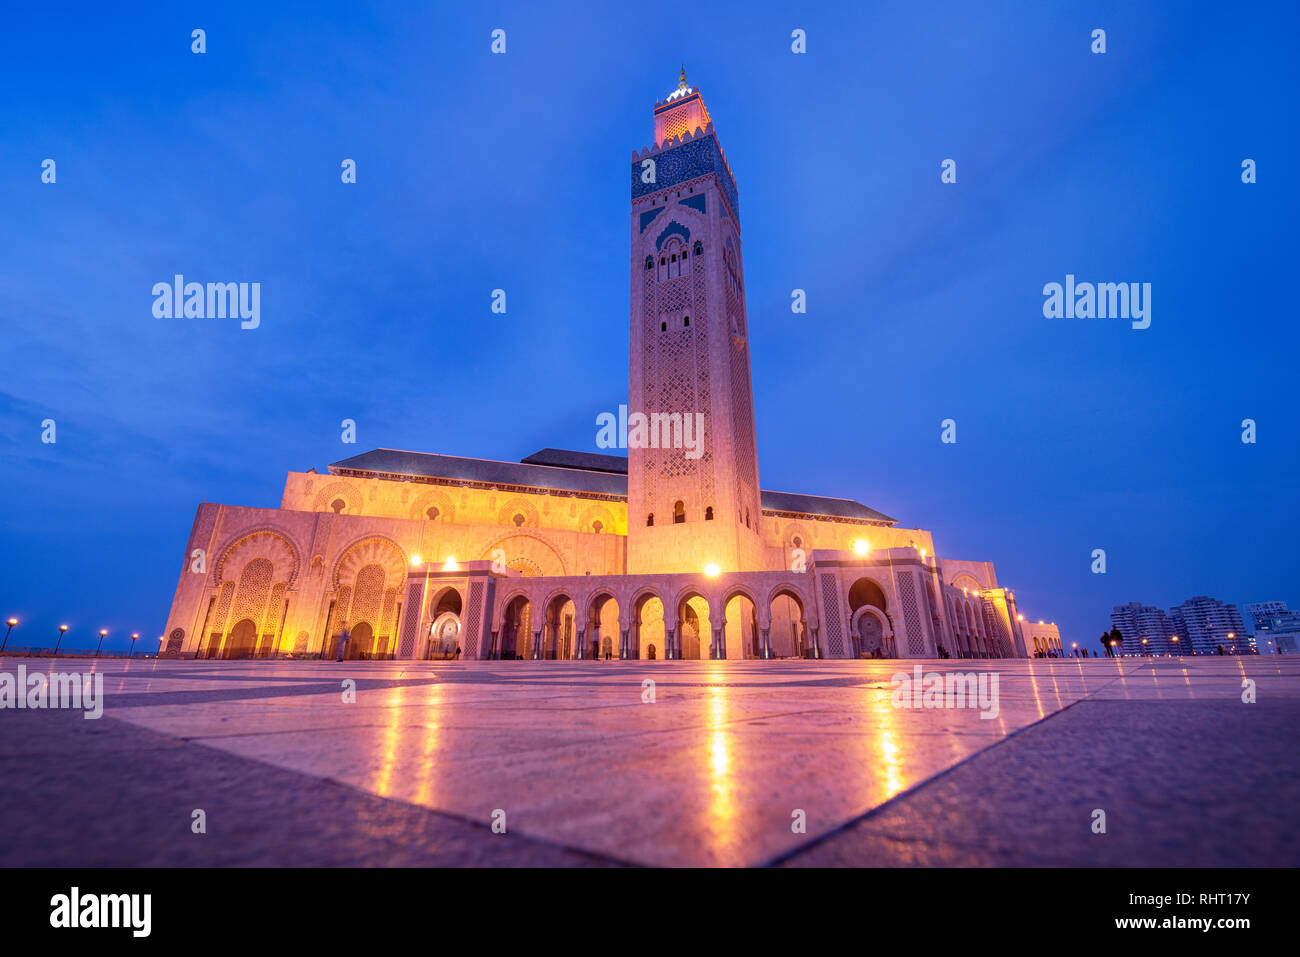 The Hassan II Mosque at the night. The largest mosque in Morocco and one of the most beautiful. Casablanca, Morocco after sunset Stock Photo